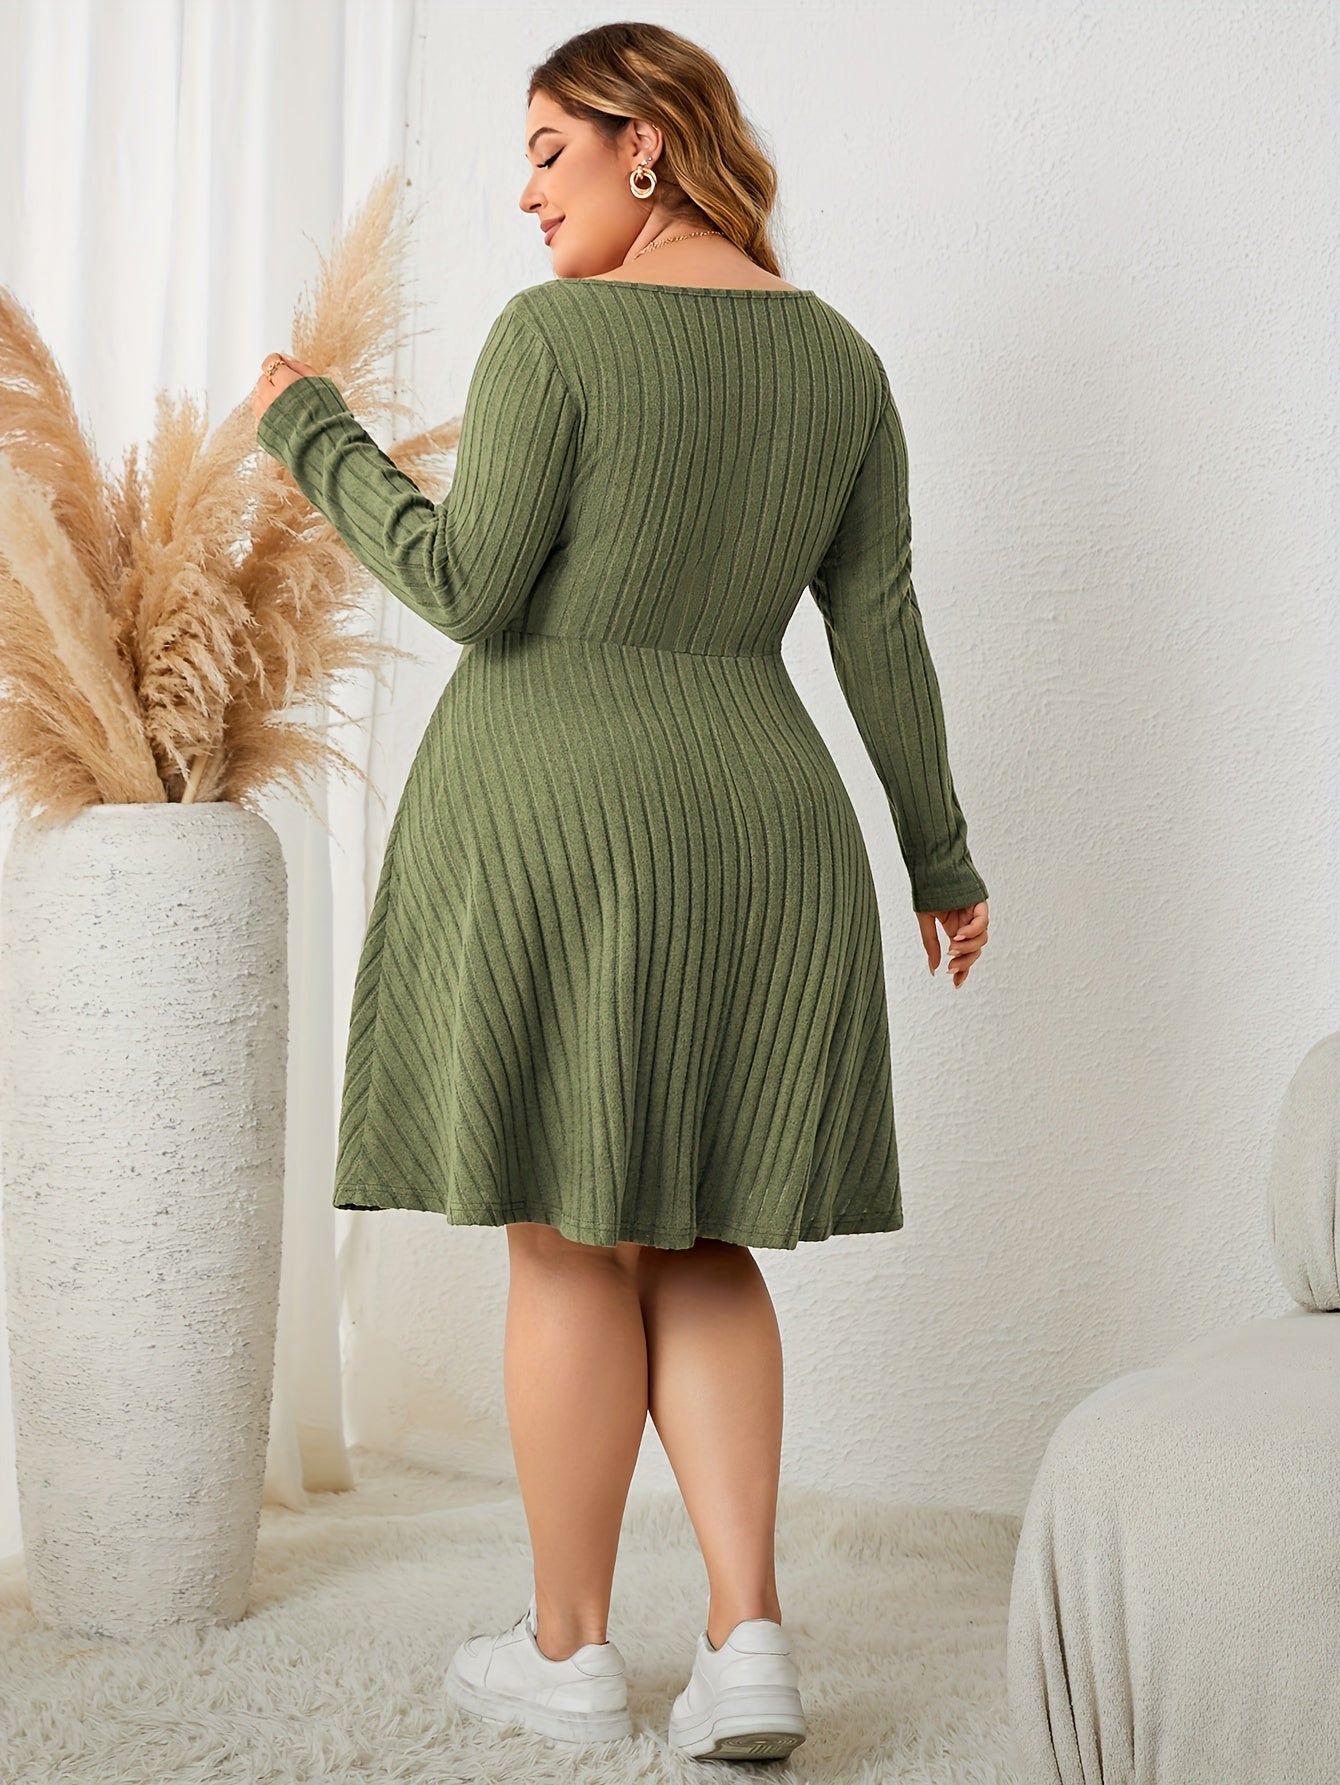 Plus Size Casual Dress, Women's Plus Solid Ribbed Ruched Tie Front Long Sleeve V Neck Knee Length Dress